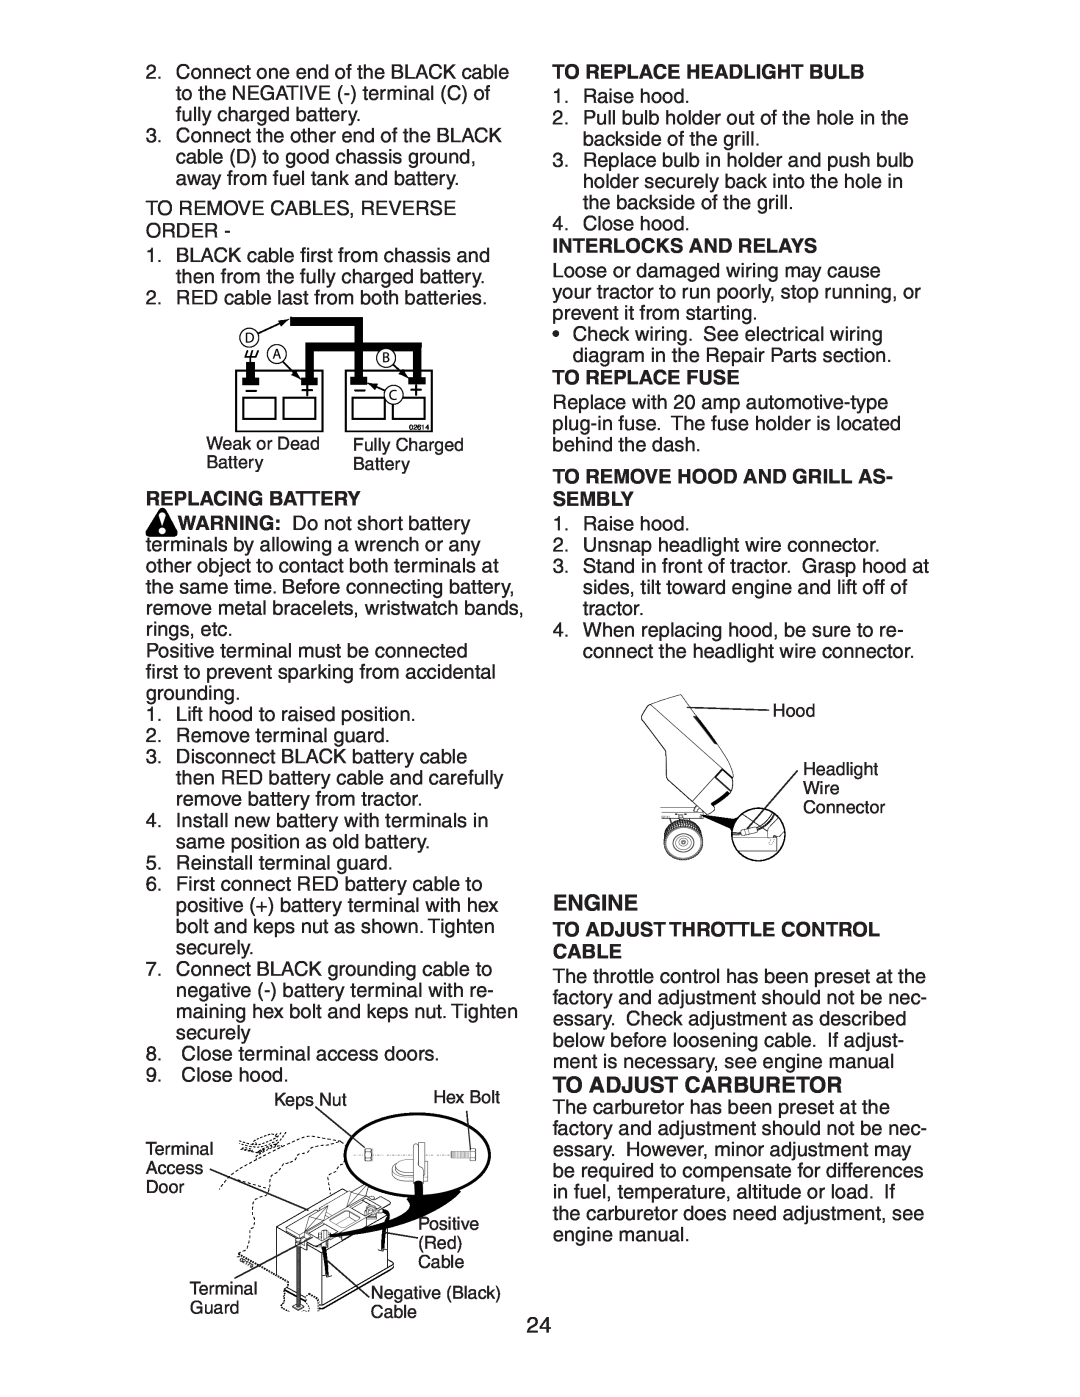 Poulan 192362 manual To Replace Headlight Bulb, Interlocks And Relays, Replacing Battery, To Replace Fuse 